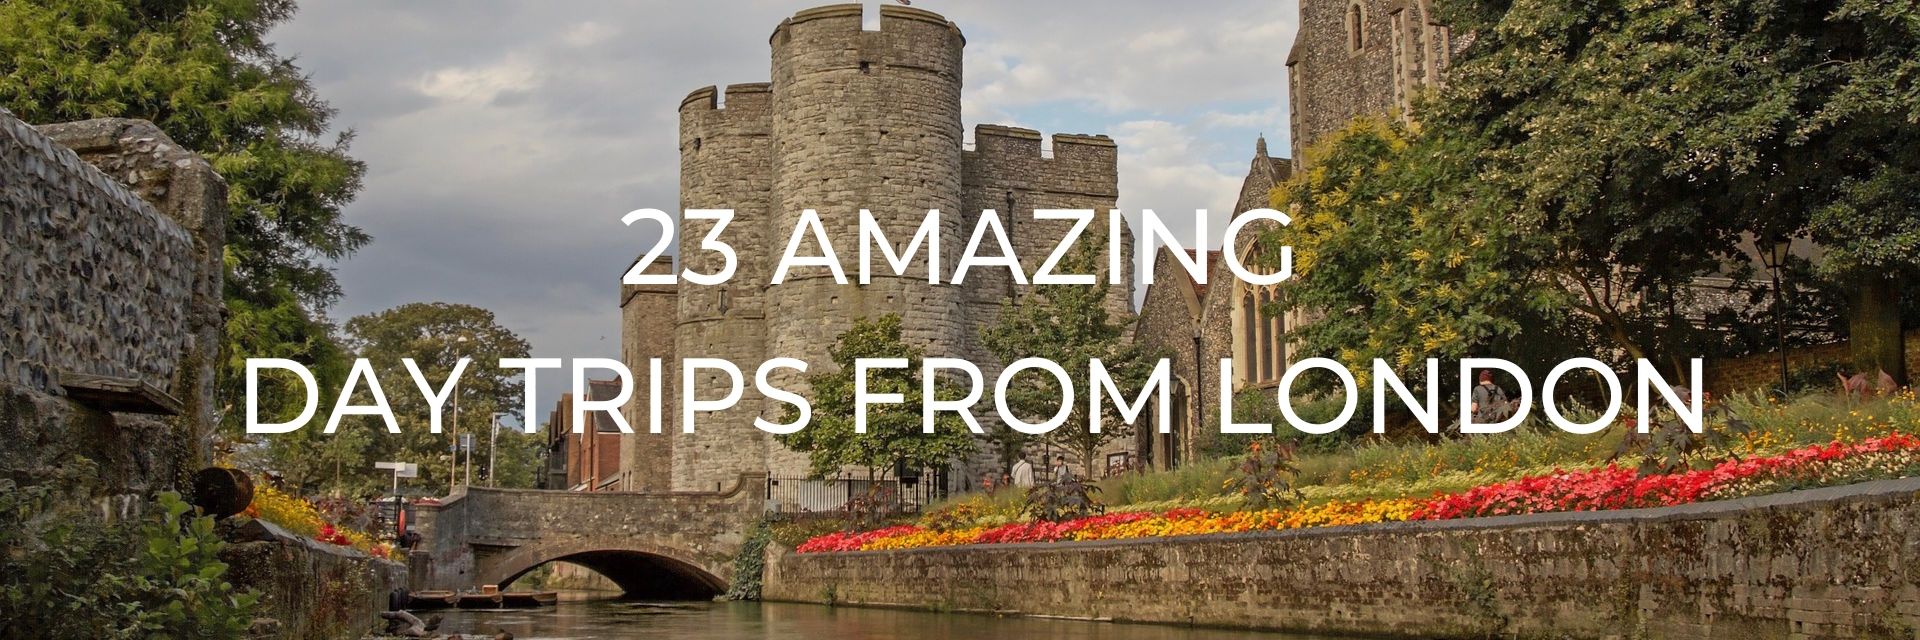 day trips from london videos